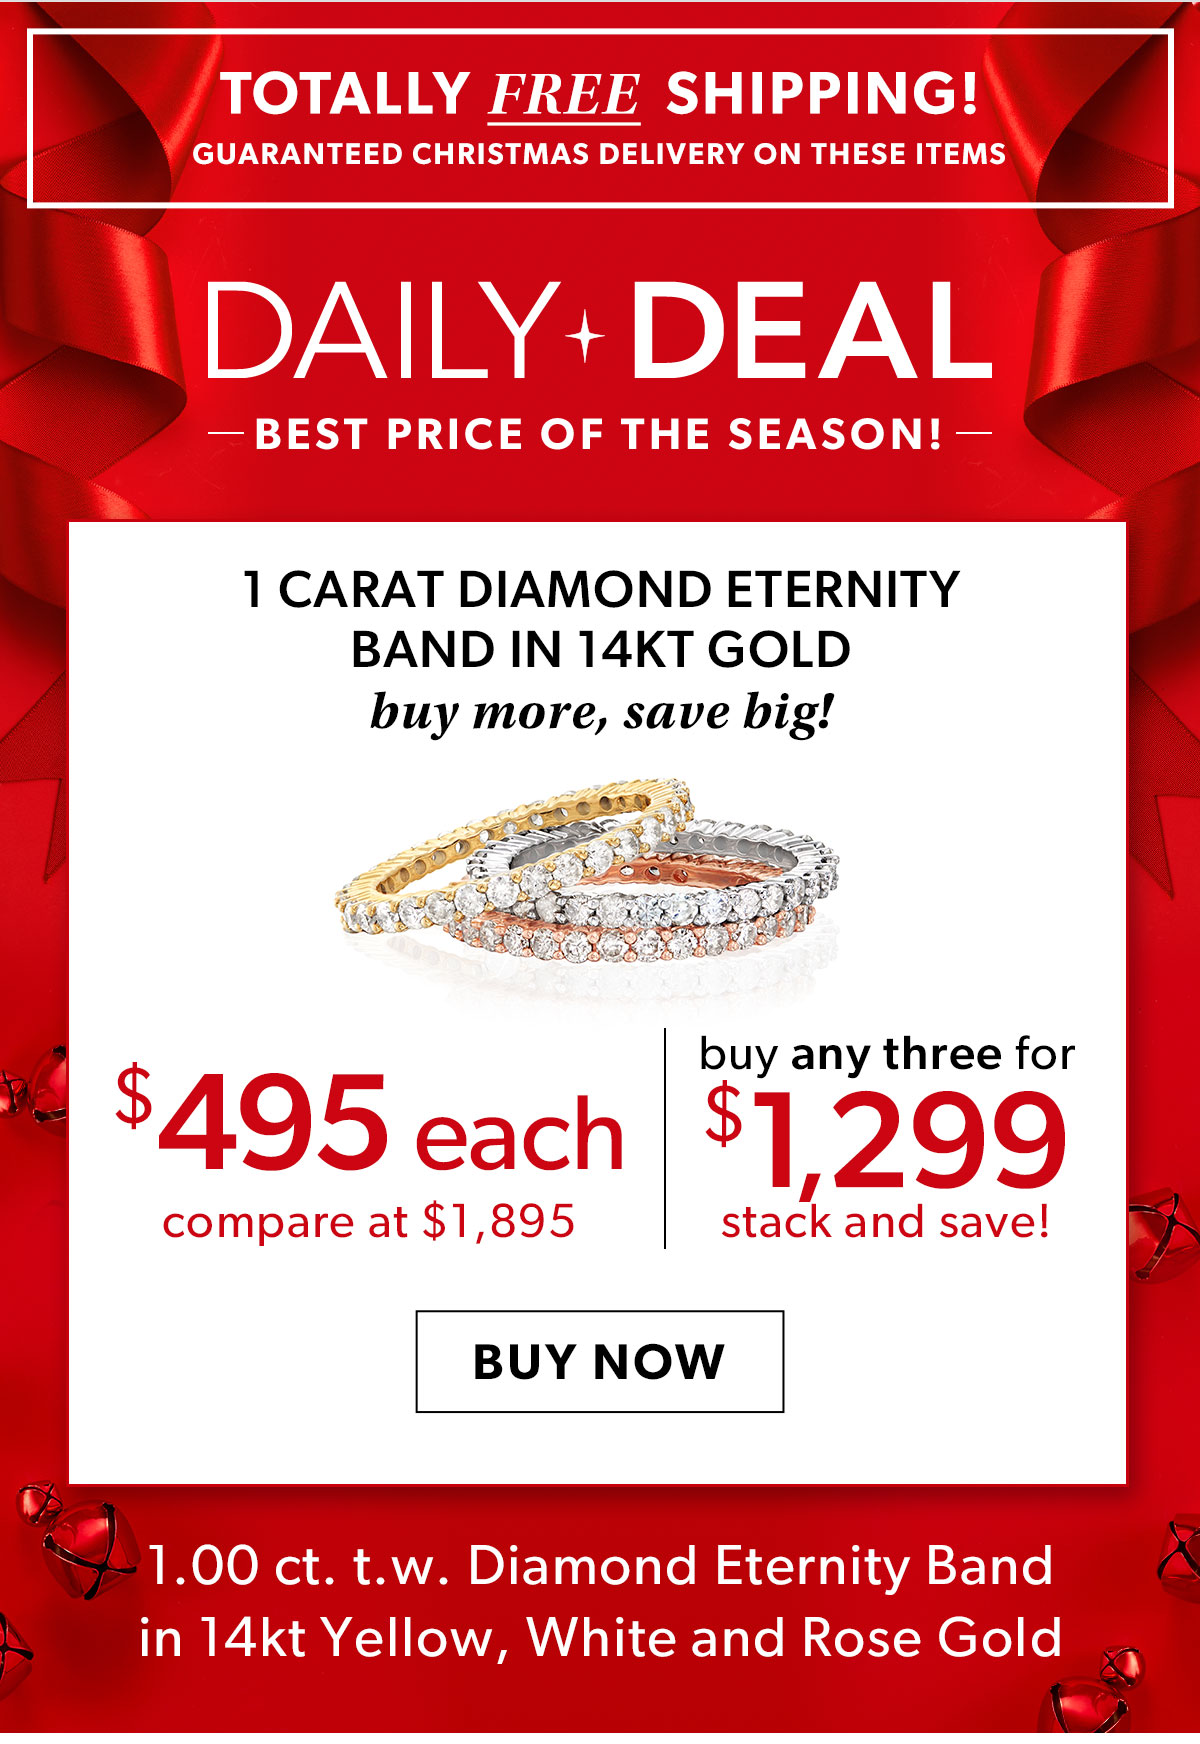 1 Carat Diamond Eternity Band in 14kt Gold. $495 ea. or Buy Any Three For $1,299. Buy Now